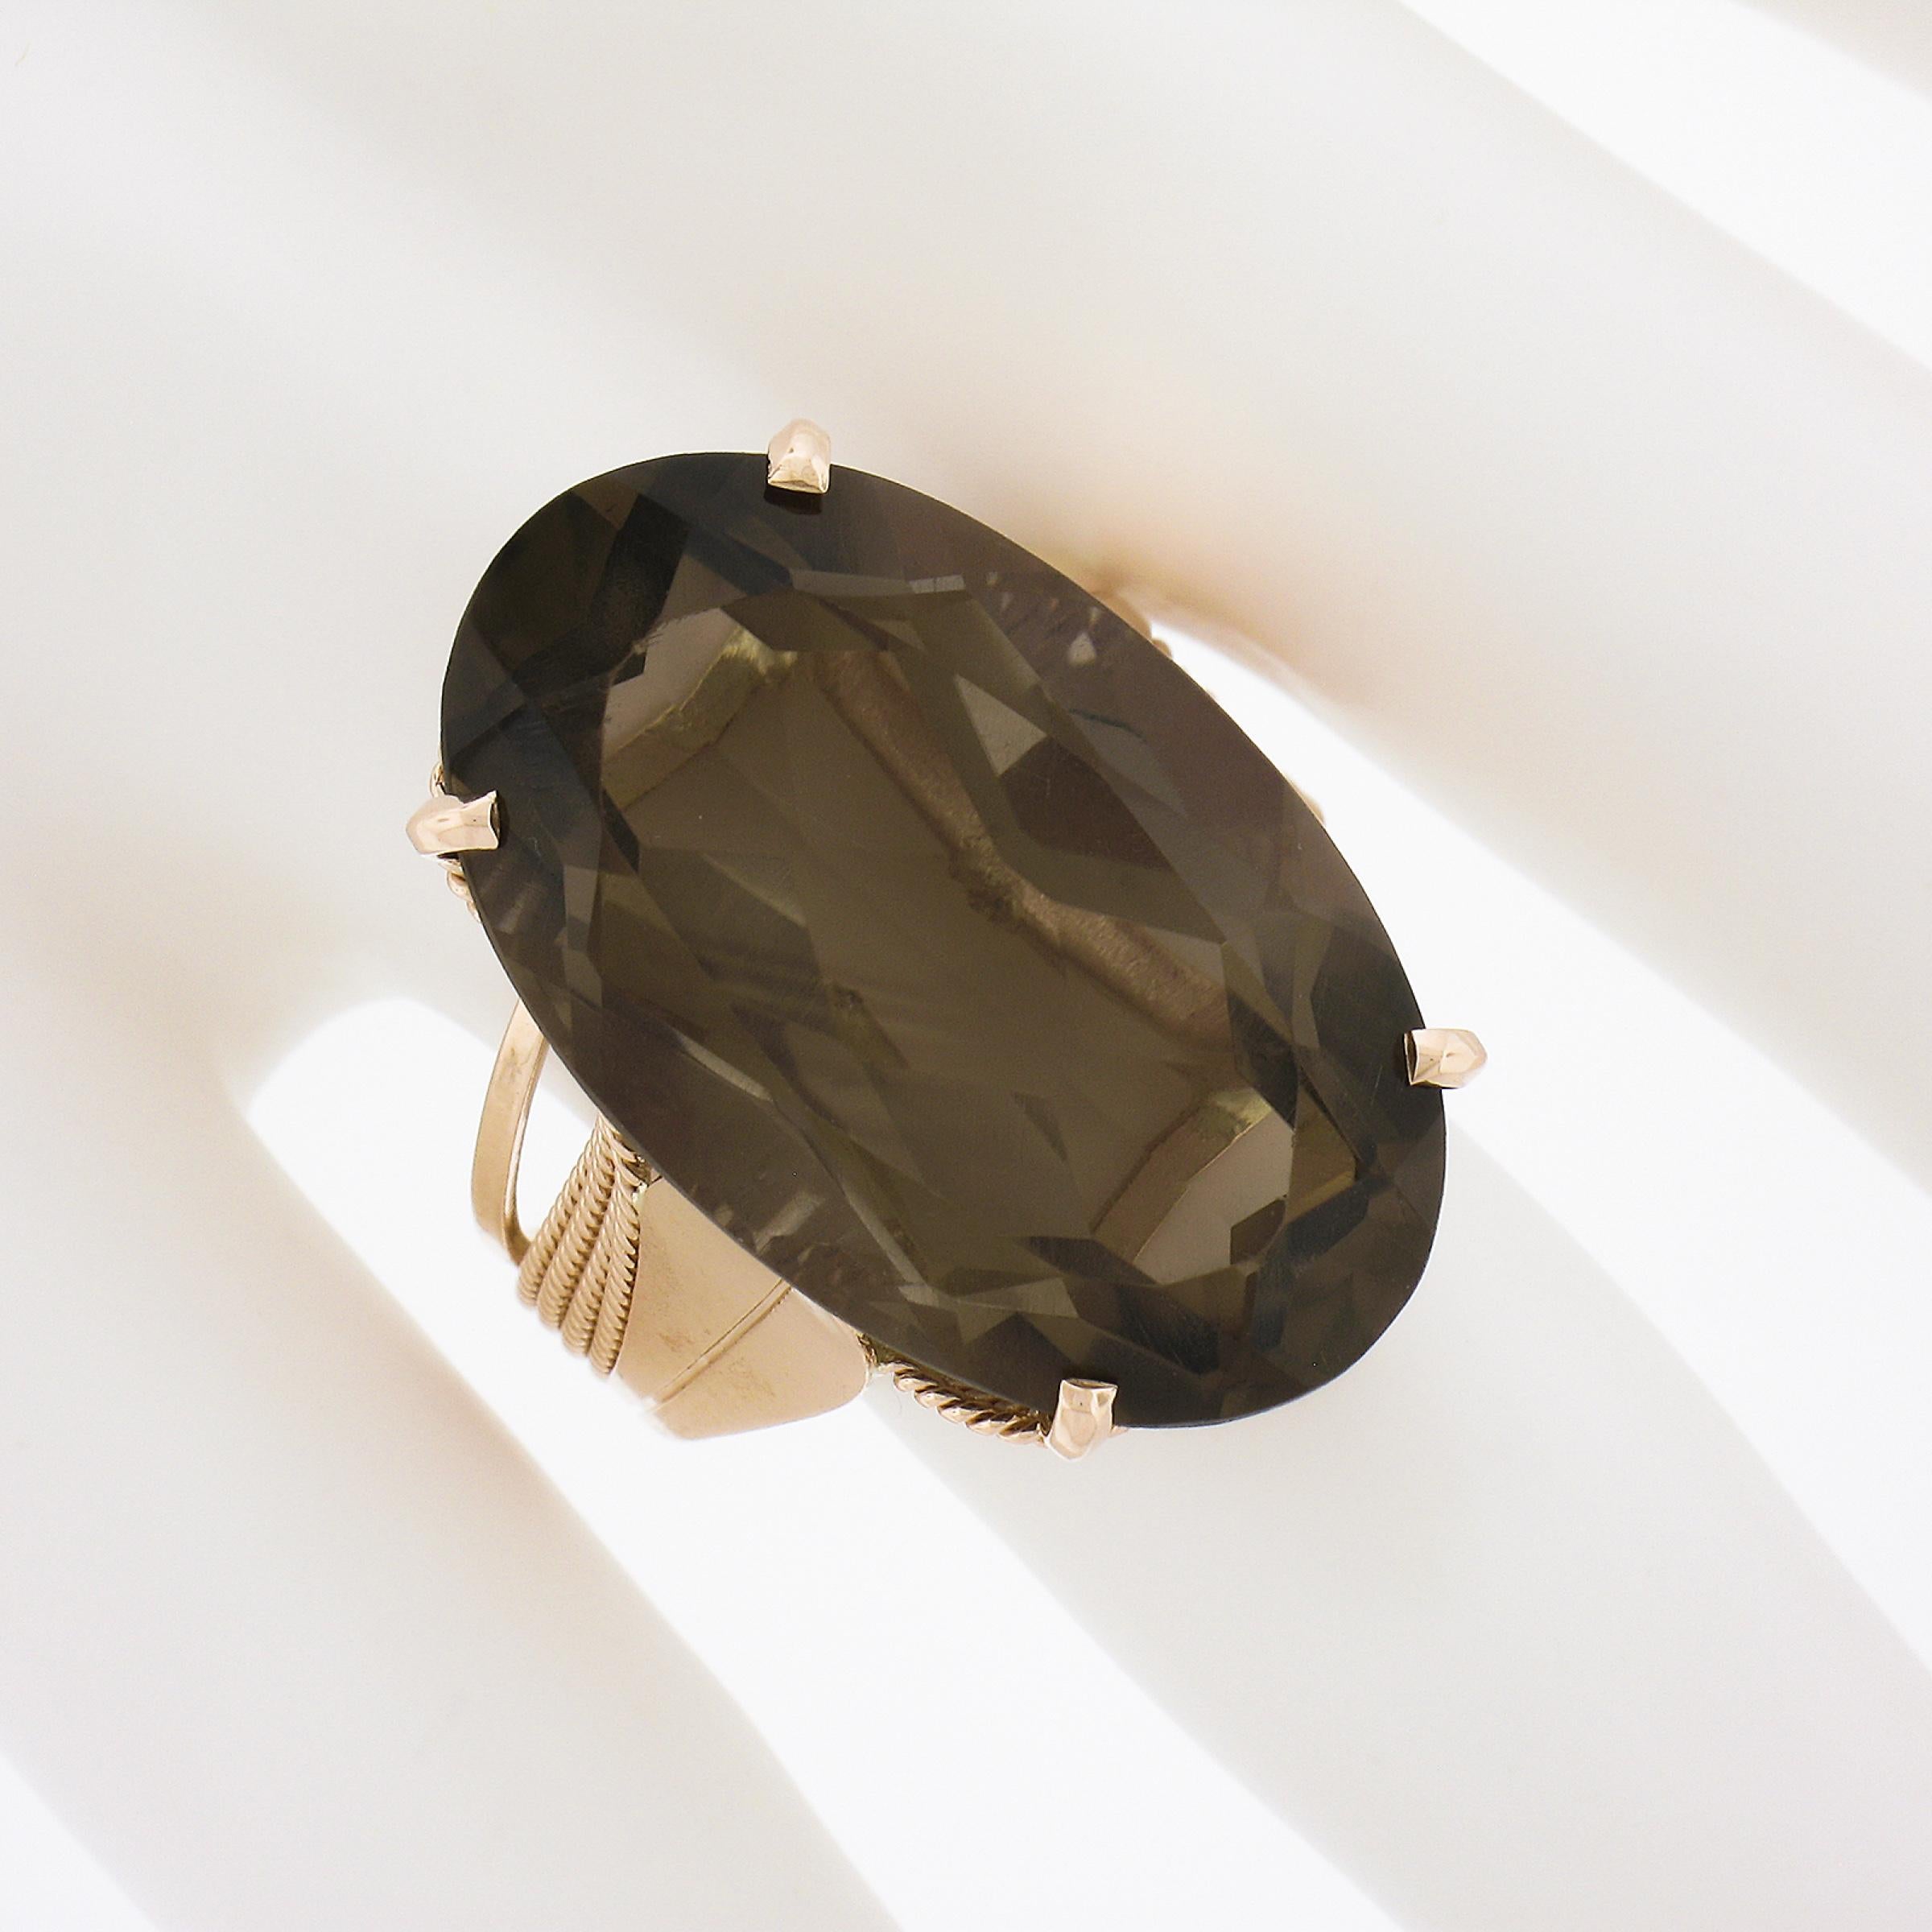 Handmade 14K Rose Gold Large Oval Smoky Quartz Solitaire Wire Work Cocktail Ring In Excellent Condition For Sale In Montclair, NJ